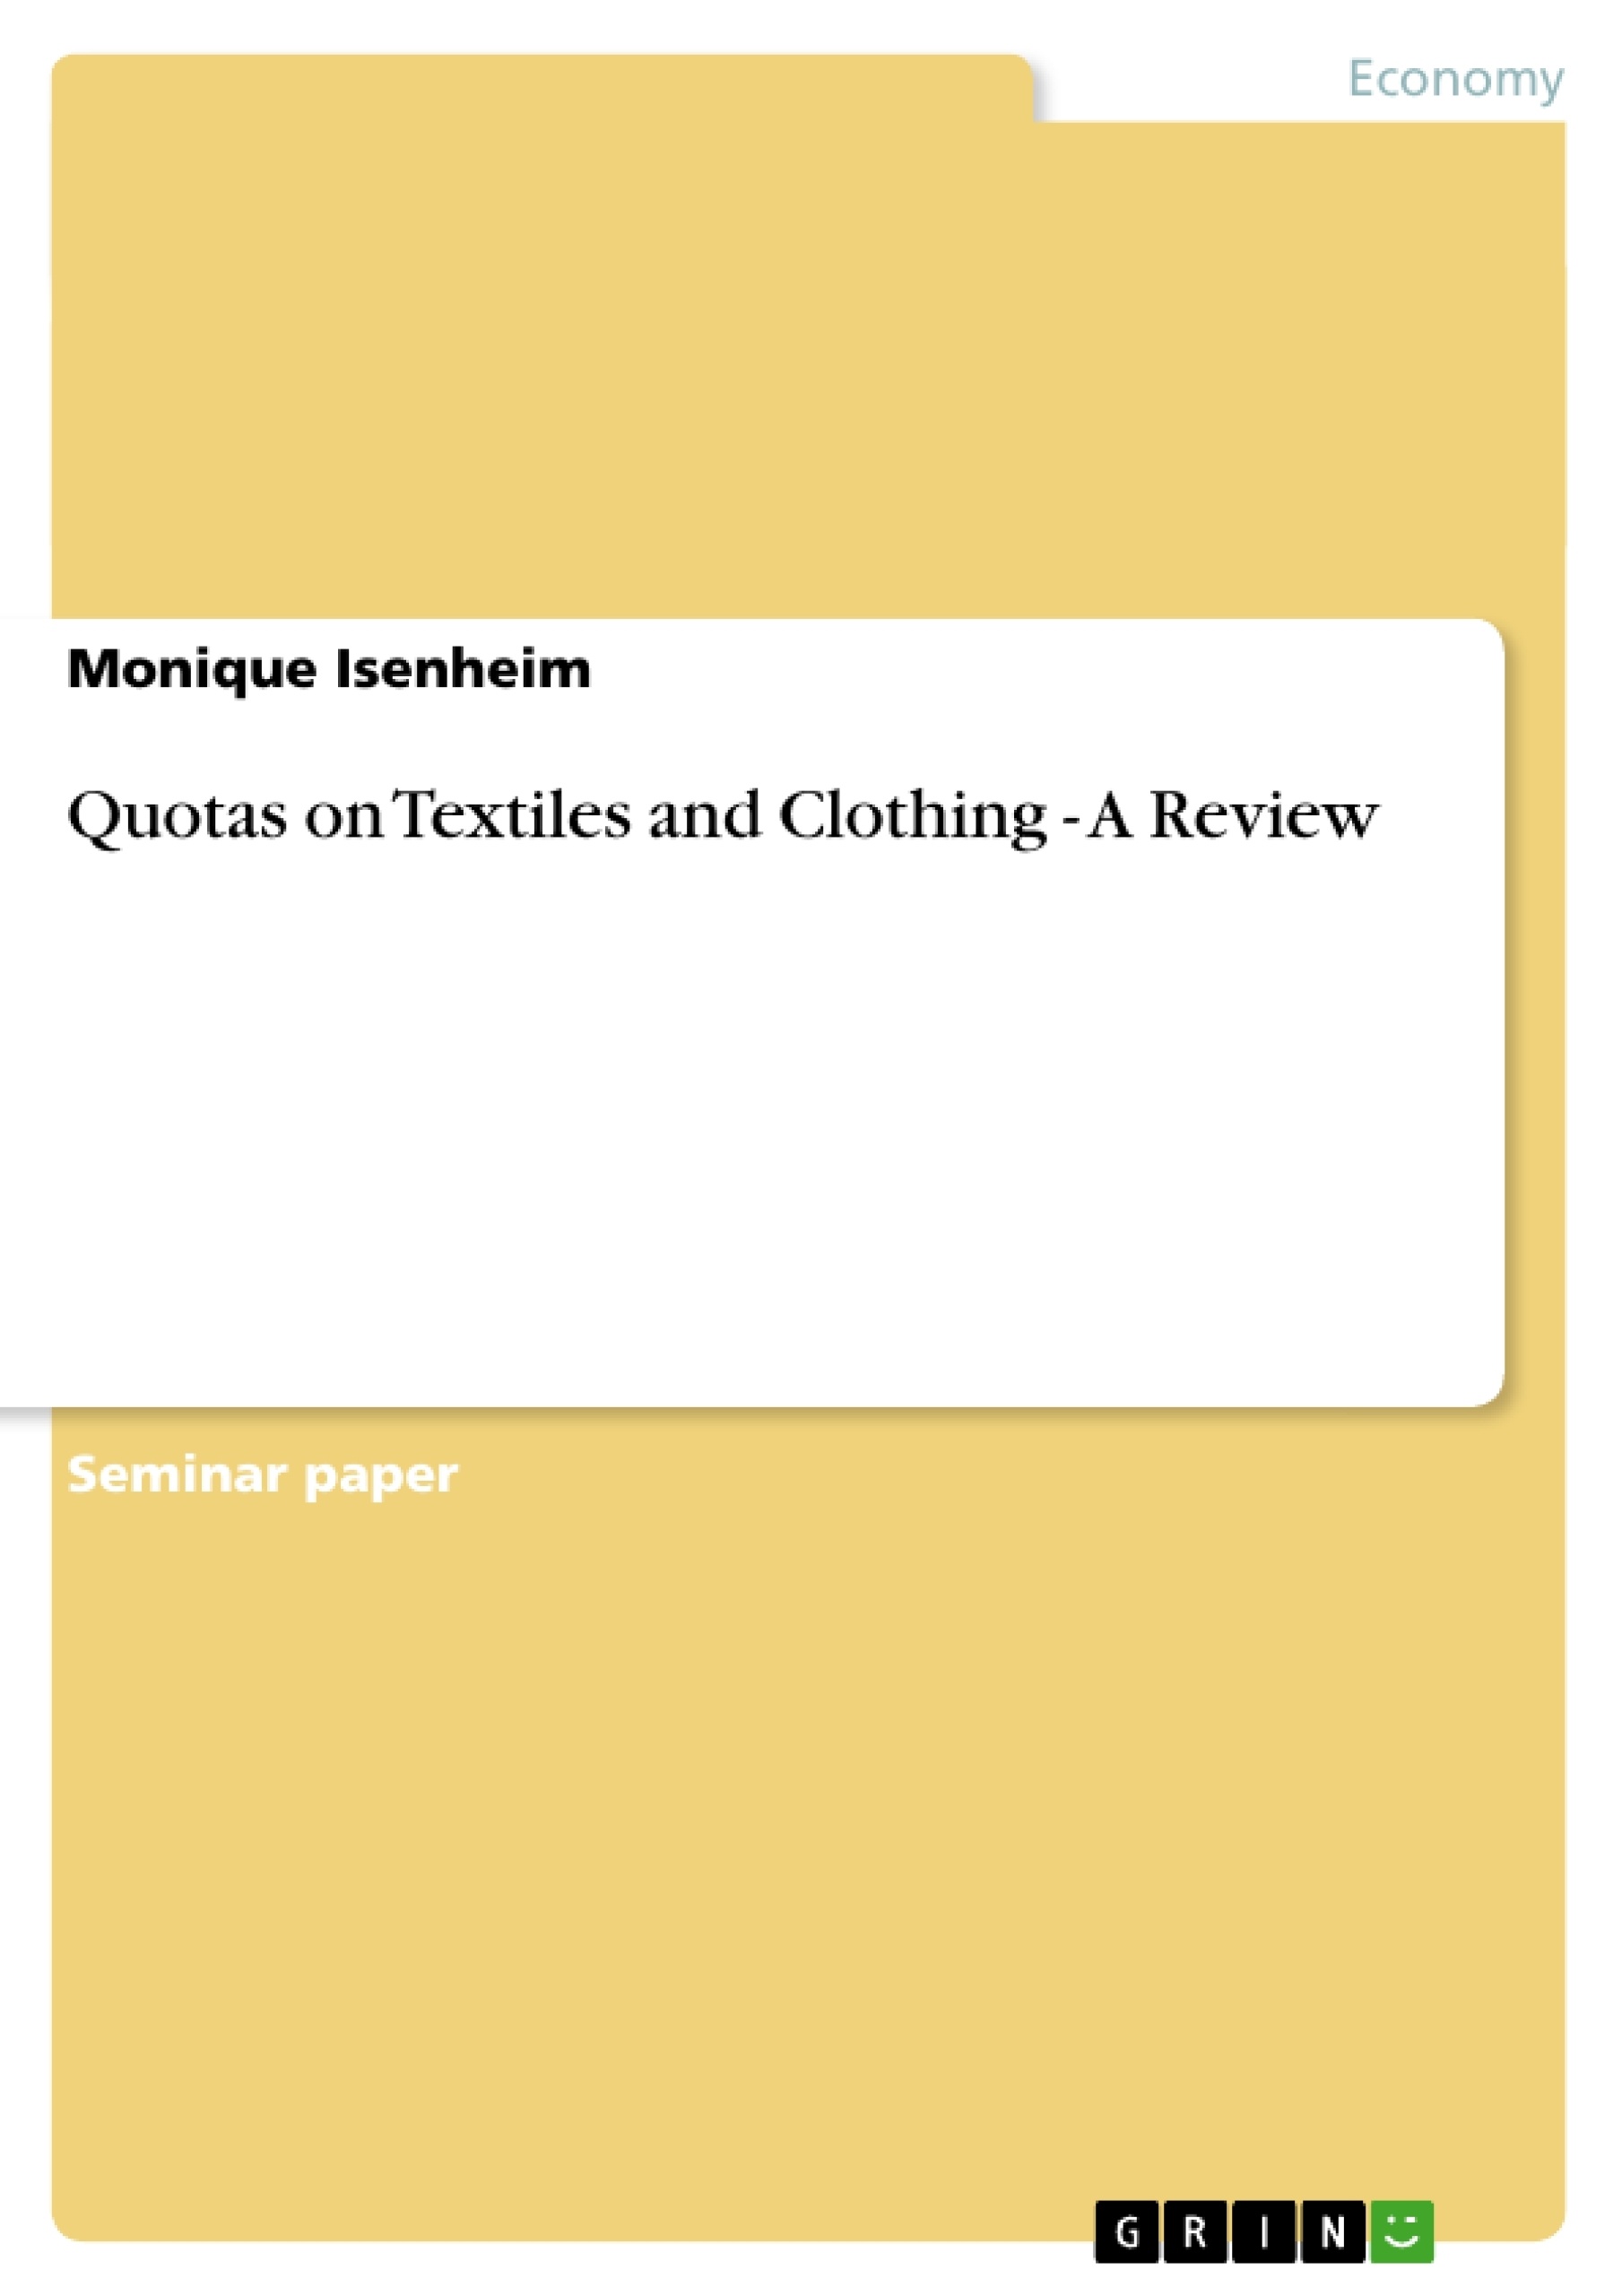 Title: Quotas on Textiles and Clothing - A Review